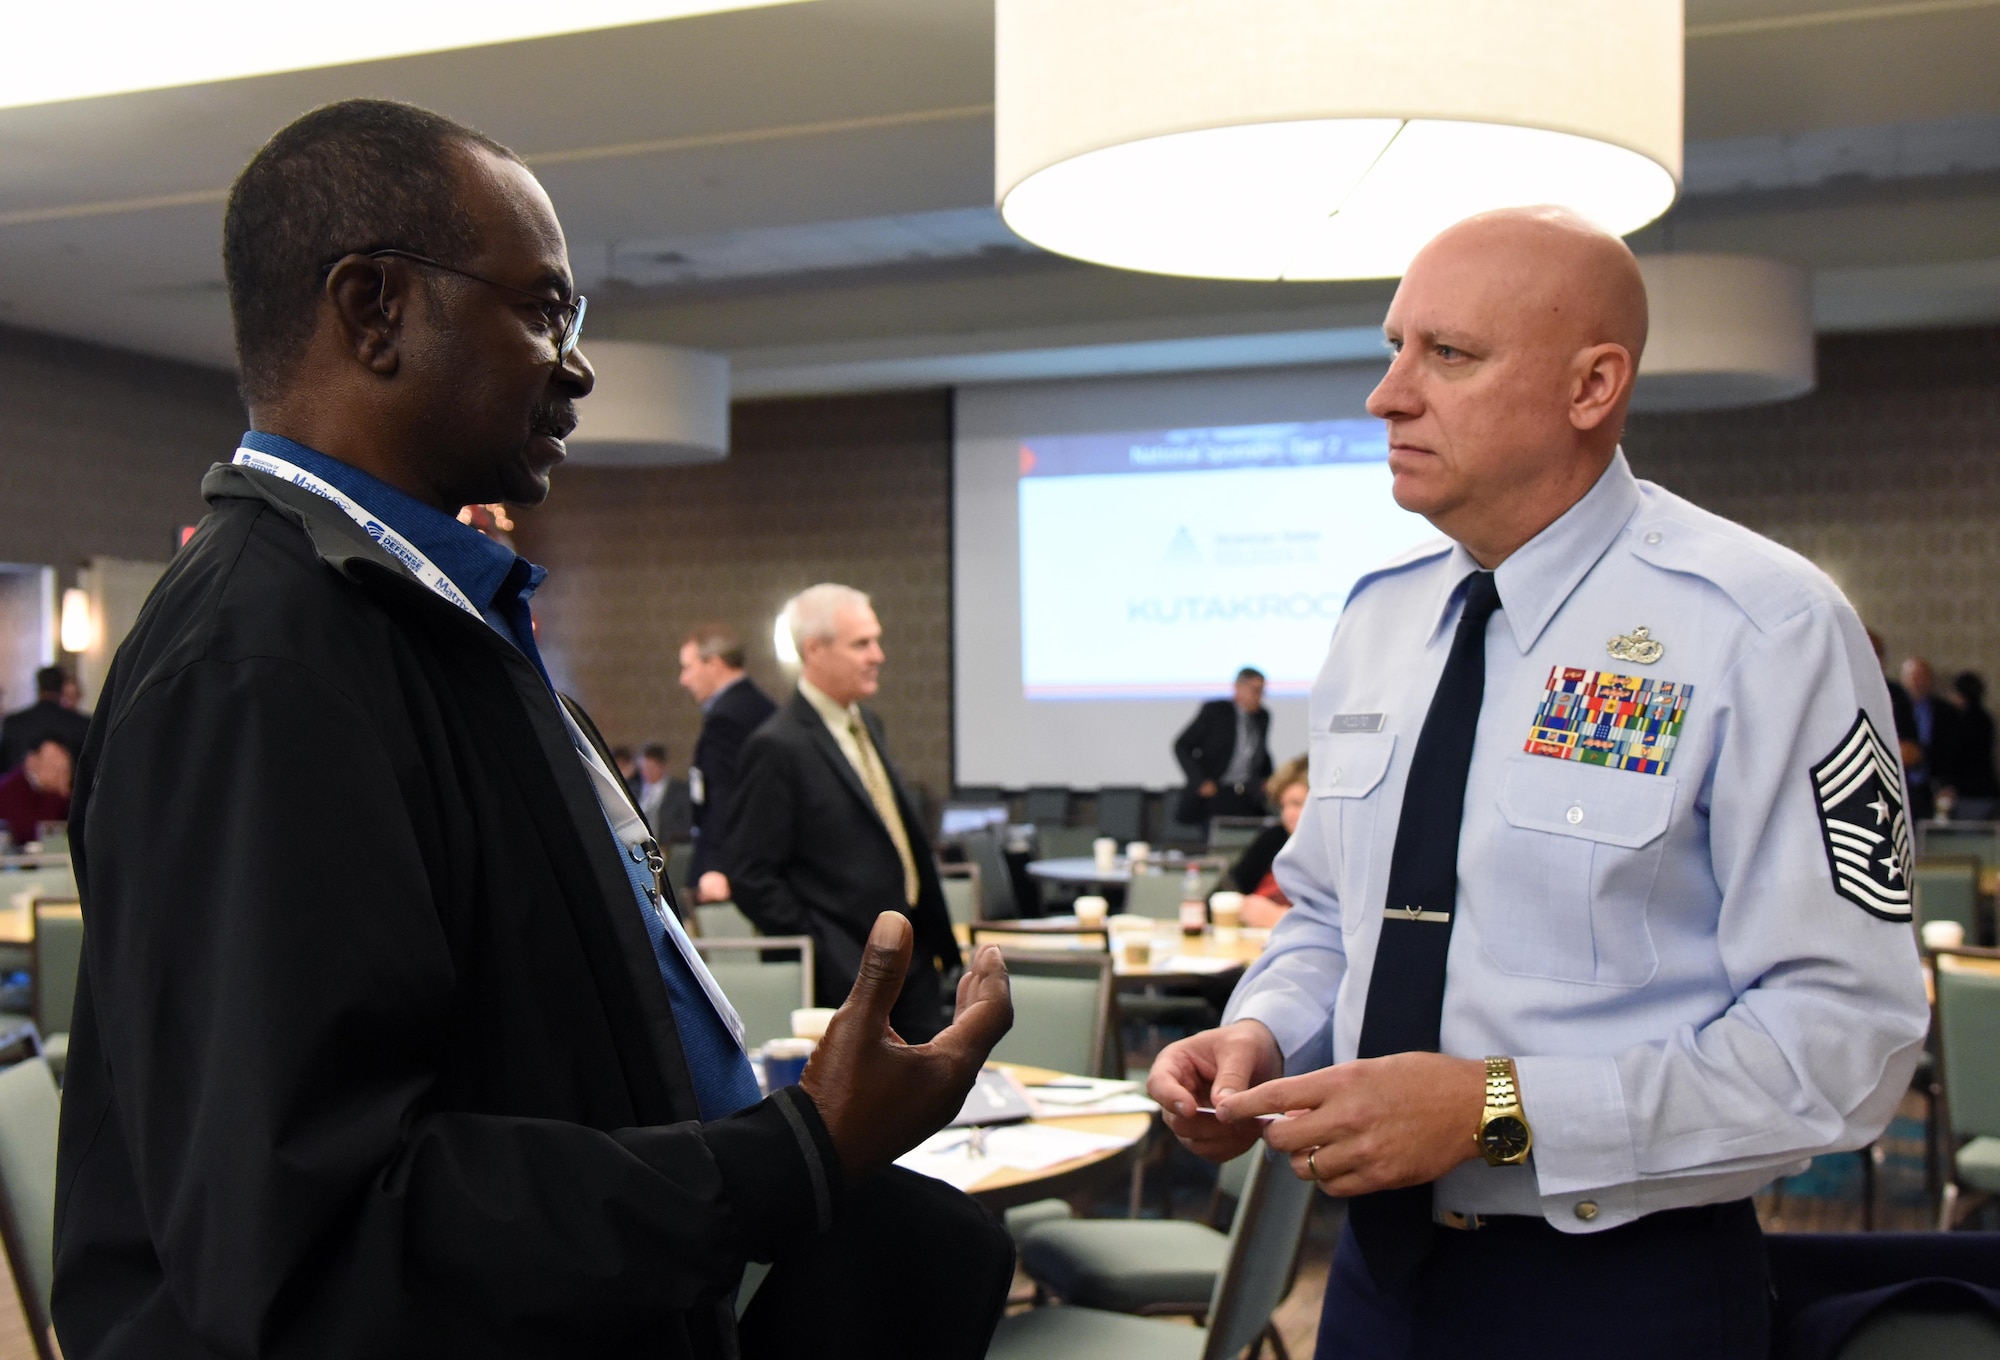 U.S. Air Force Chief Master Sgt. David Pizzuto, 81st Training Wing command chief, engages in discussion with Jeff Moore, SCORE certified mentor, during the Mississippi Gulf Coast Defense Forum inside the Courtyard by Marriott Gulfport Beachfront in Gulfport, Mississippi, Dec. 4, 2018. Over 130 people were in attendance over the two-day event, where participants gained a greater understanding of our military capabilities and opportunities in Mississippi. (U.S. Air Force photo by Kemberly Groue)